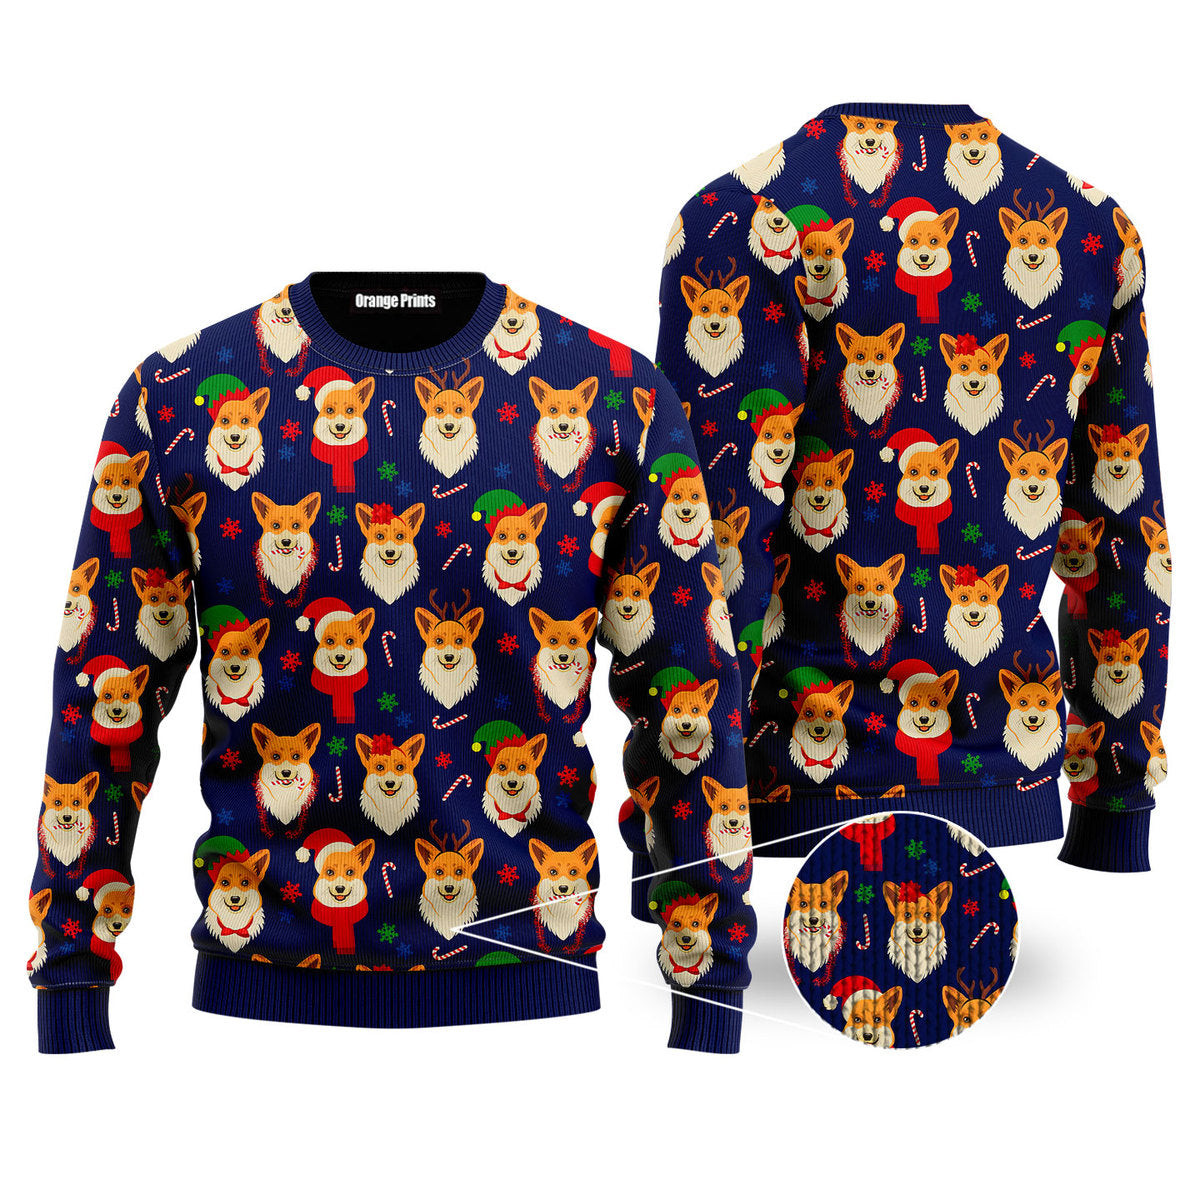 Merry Corgmas Corgi Dog Lover Ugly Christmas Sweater Ugly Sweater For Men Women, Holiday Sweater